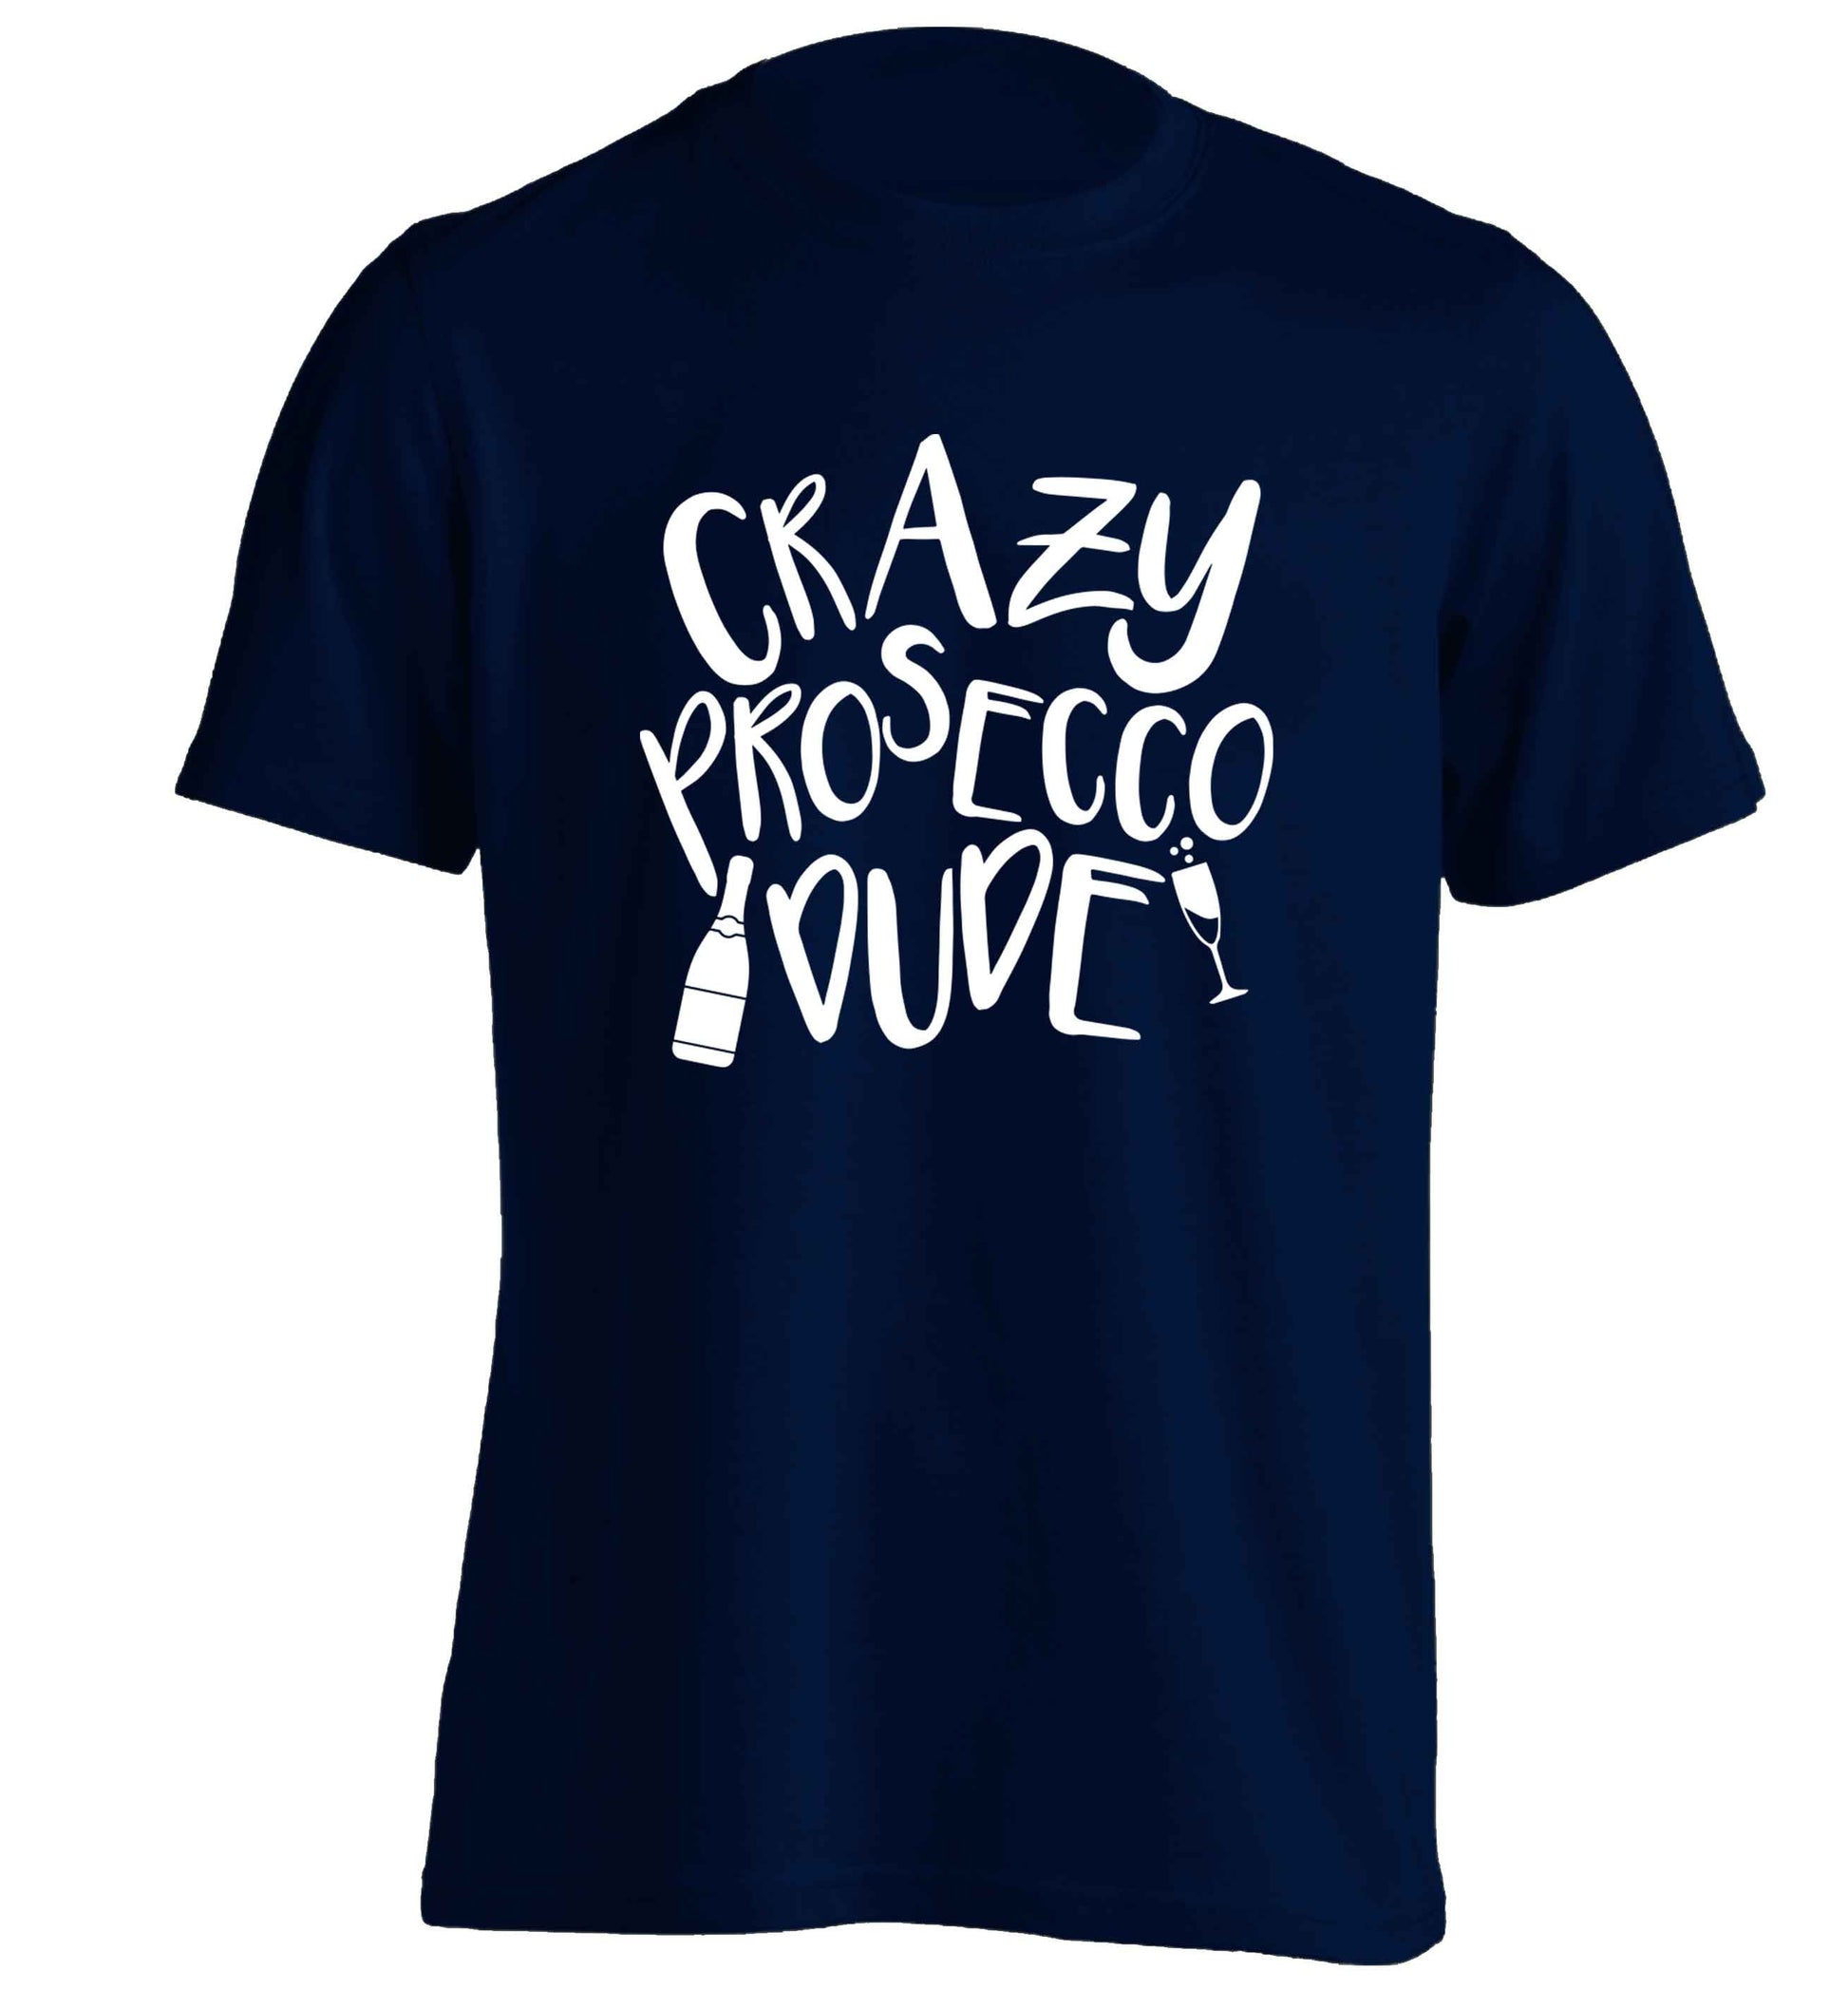 Crazy prosecco dude adults unisex navy Tshirt 2XL